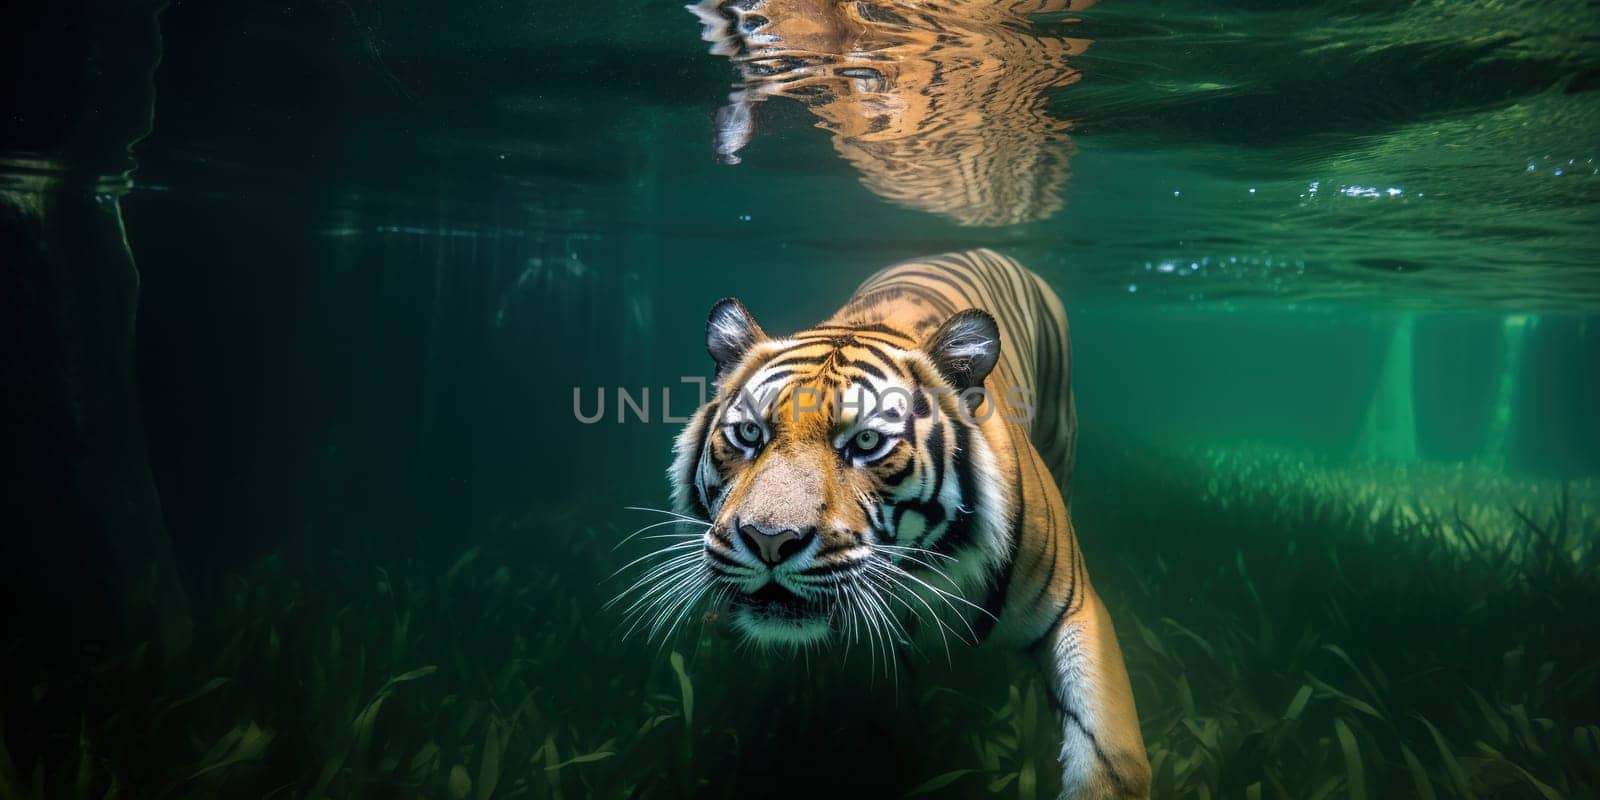 wild tiger swimming in the water of river by tan4ikk1